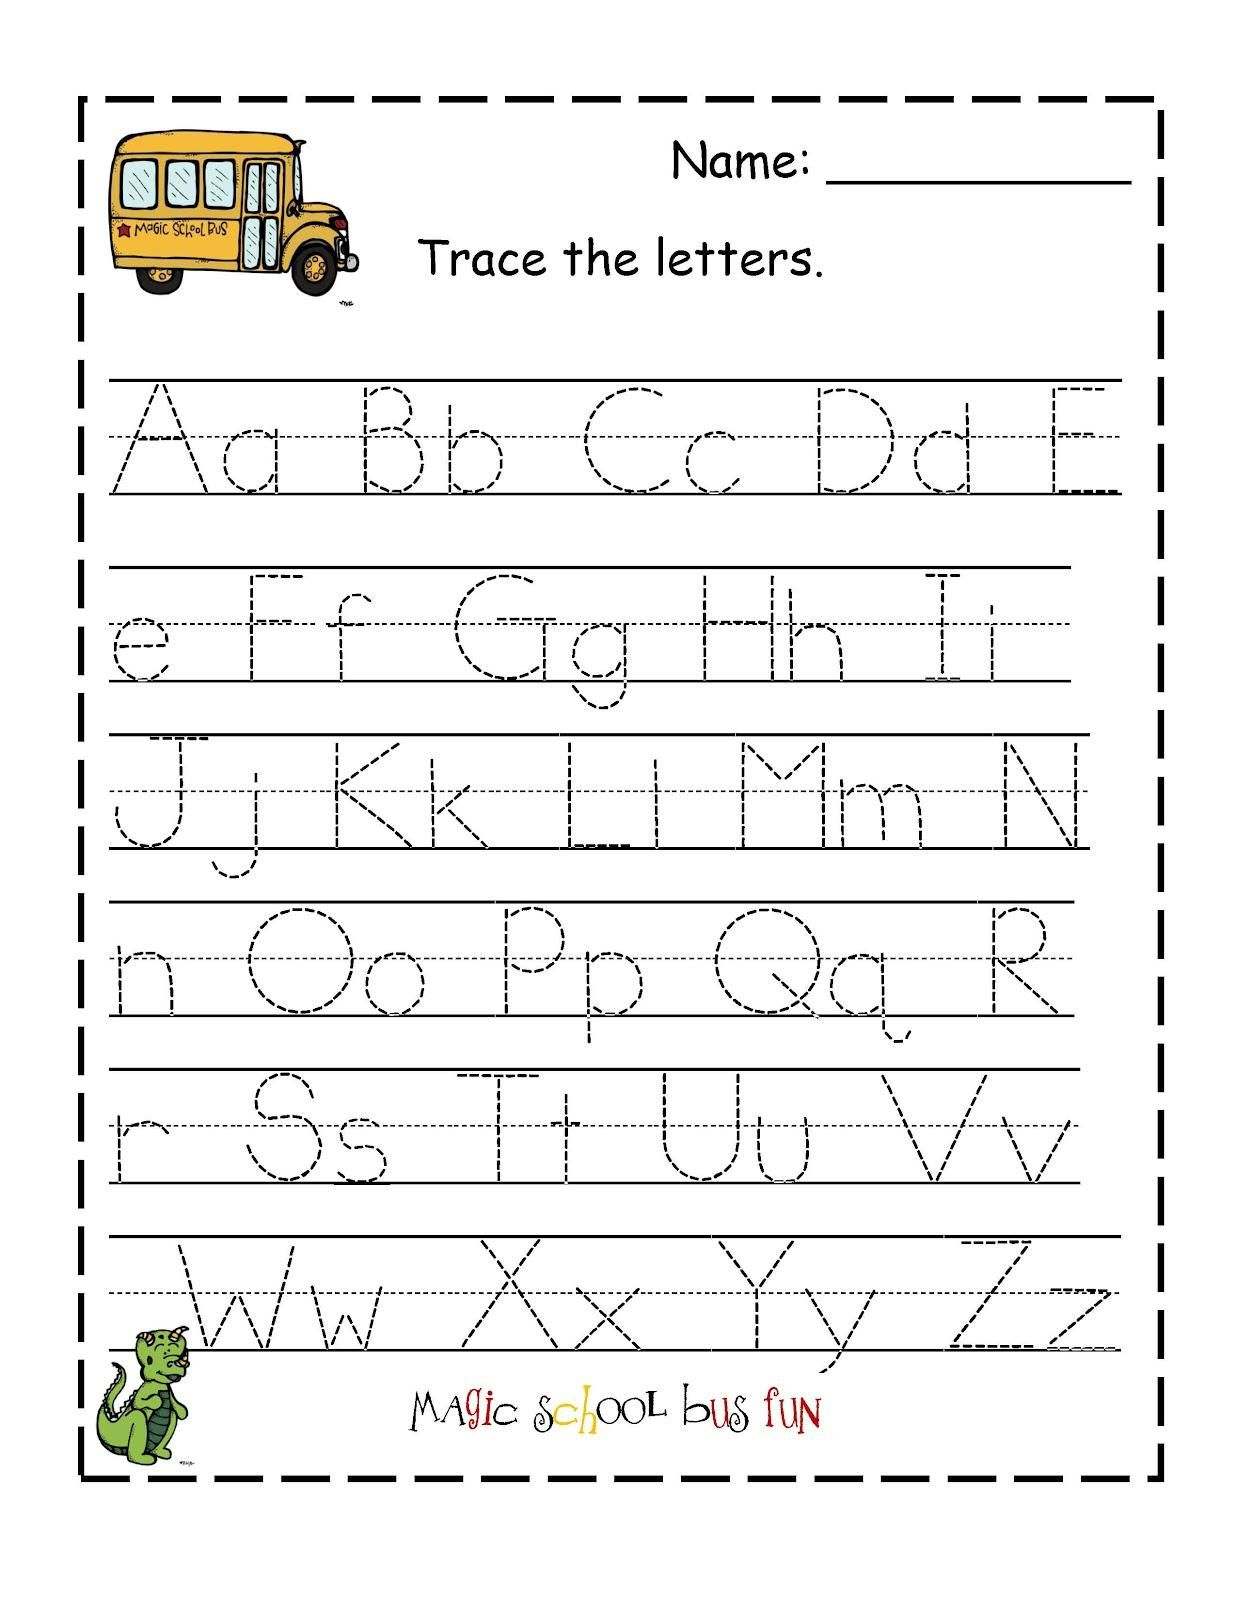 Coloring Book : Printable Letter Tracing Sheets For intended for Free Printable Tracing Letters And Numbers Worksheets